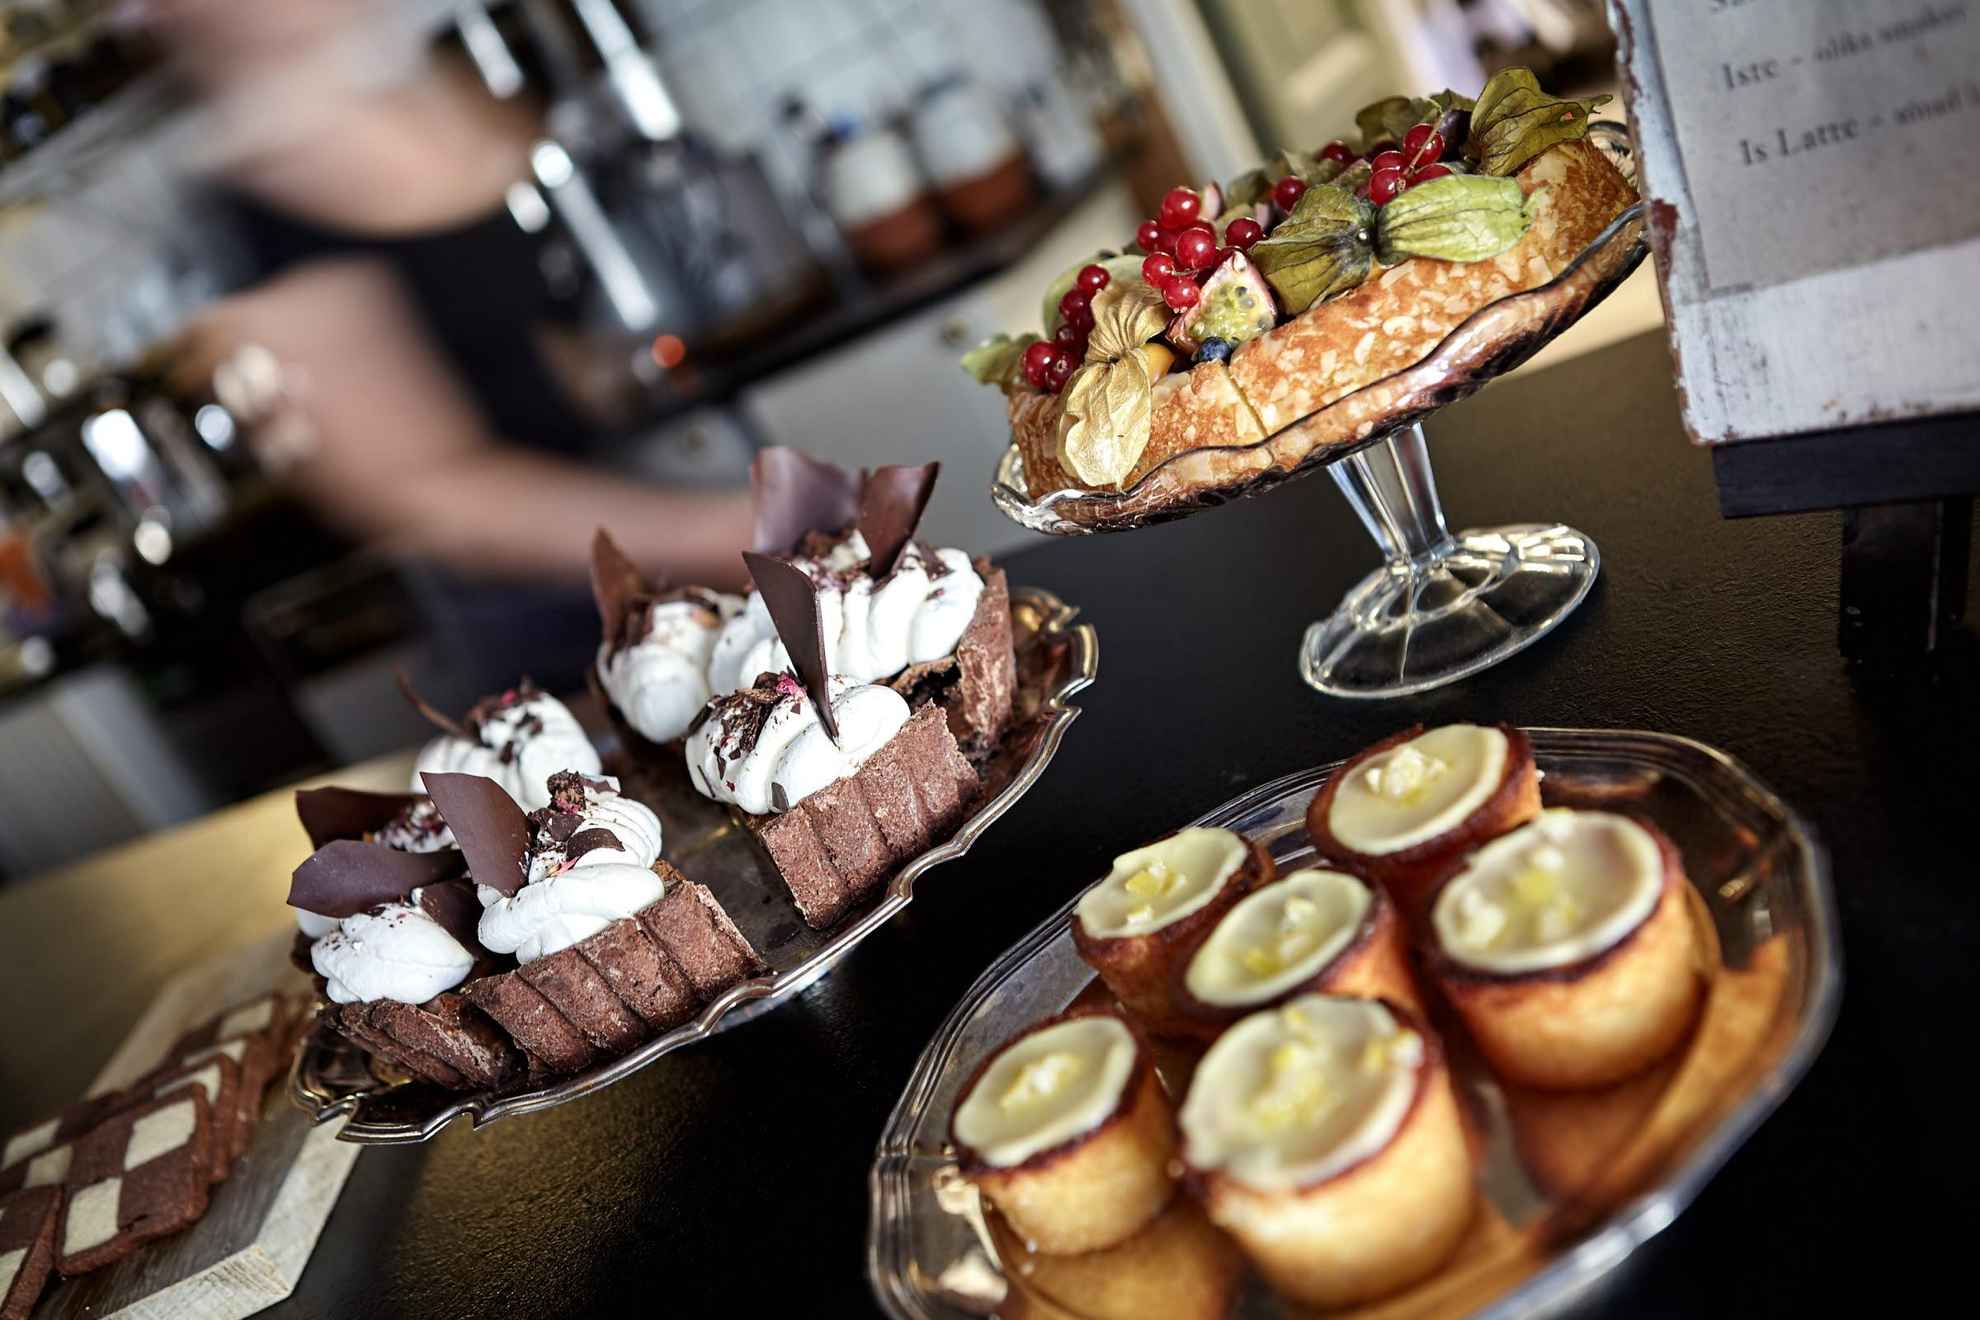 Pies and cakes on a buffet.